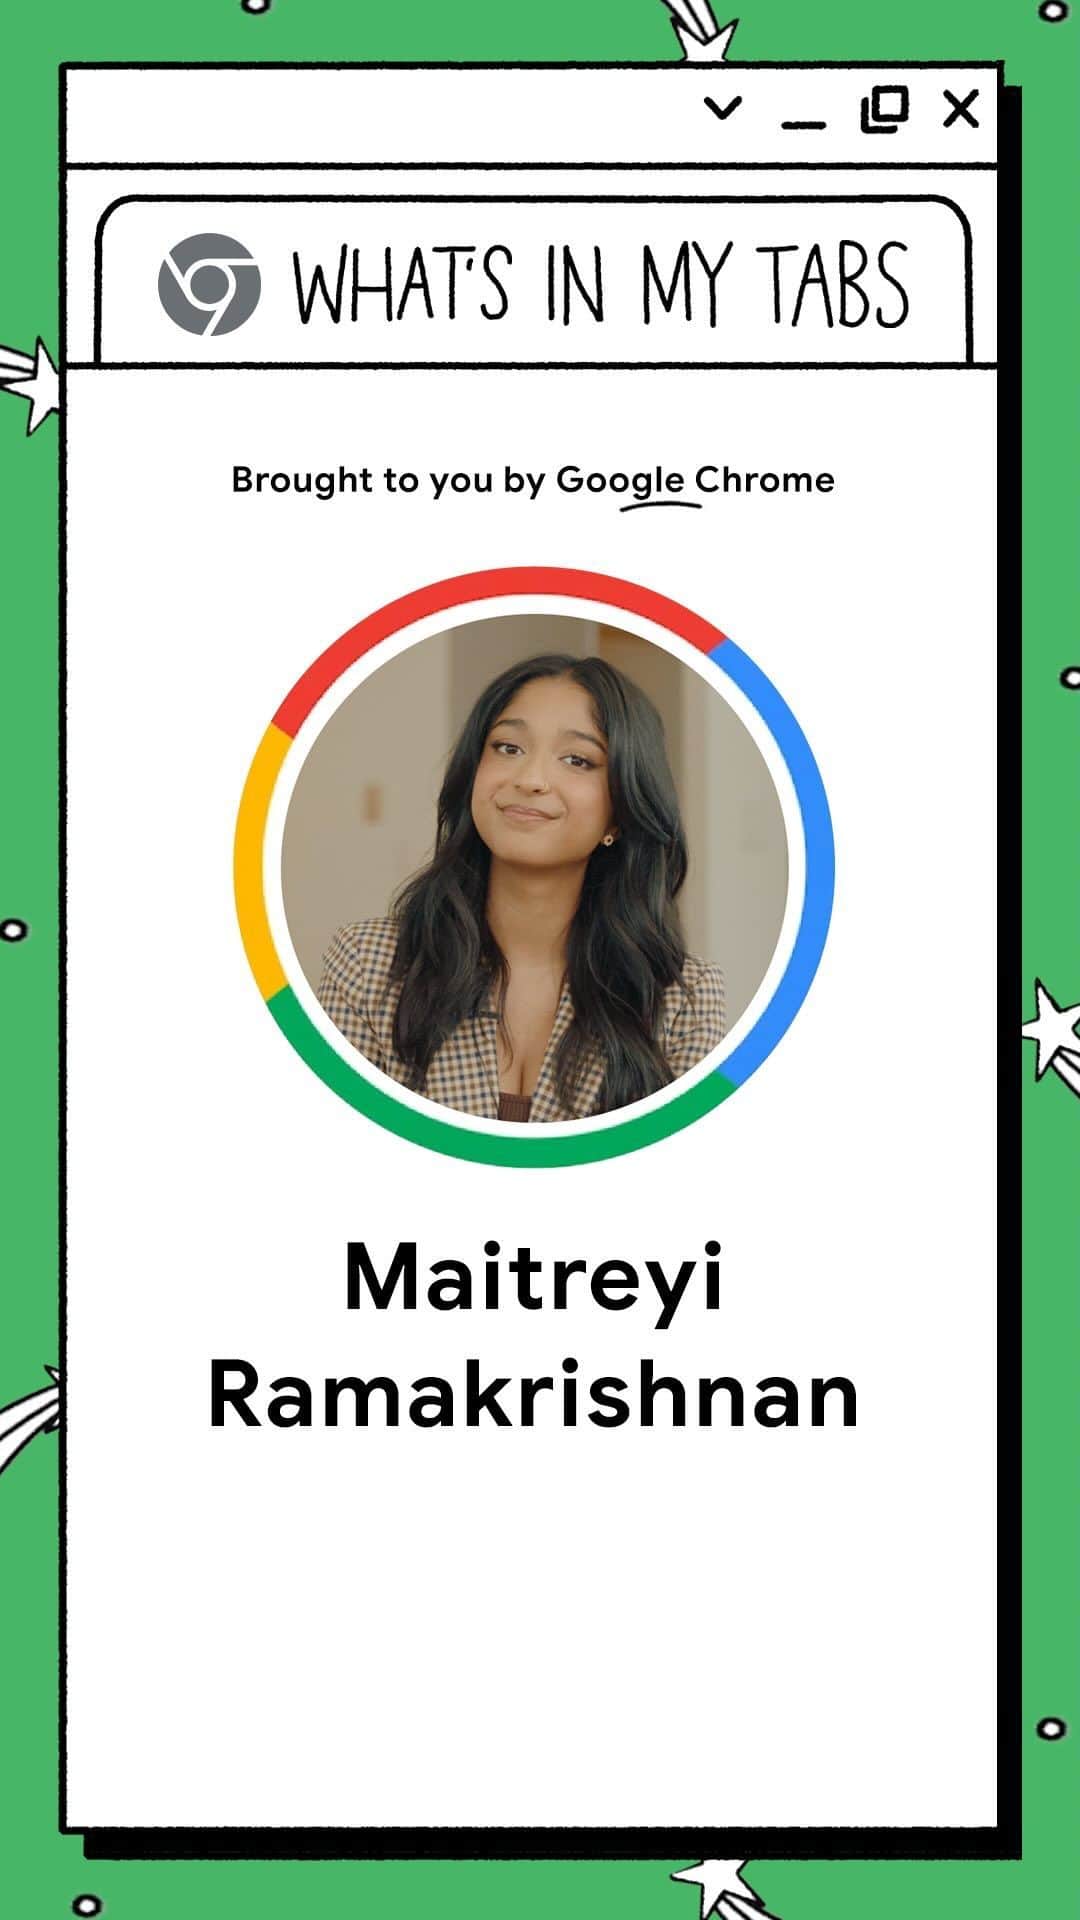 Googleのインスタグラム：「Hey, It’s @MaitreyiRamakrishan showing you how @google Chrome helps keep my chaotic life somewhat calm. 😌 Check out my episode of #WhatsInMyTabs to find out what tabs I use as an actor, why I have three different Gmail accounts, and my anime watchlist. #GoogleChrome. #ad」